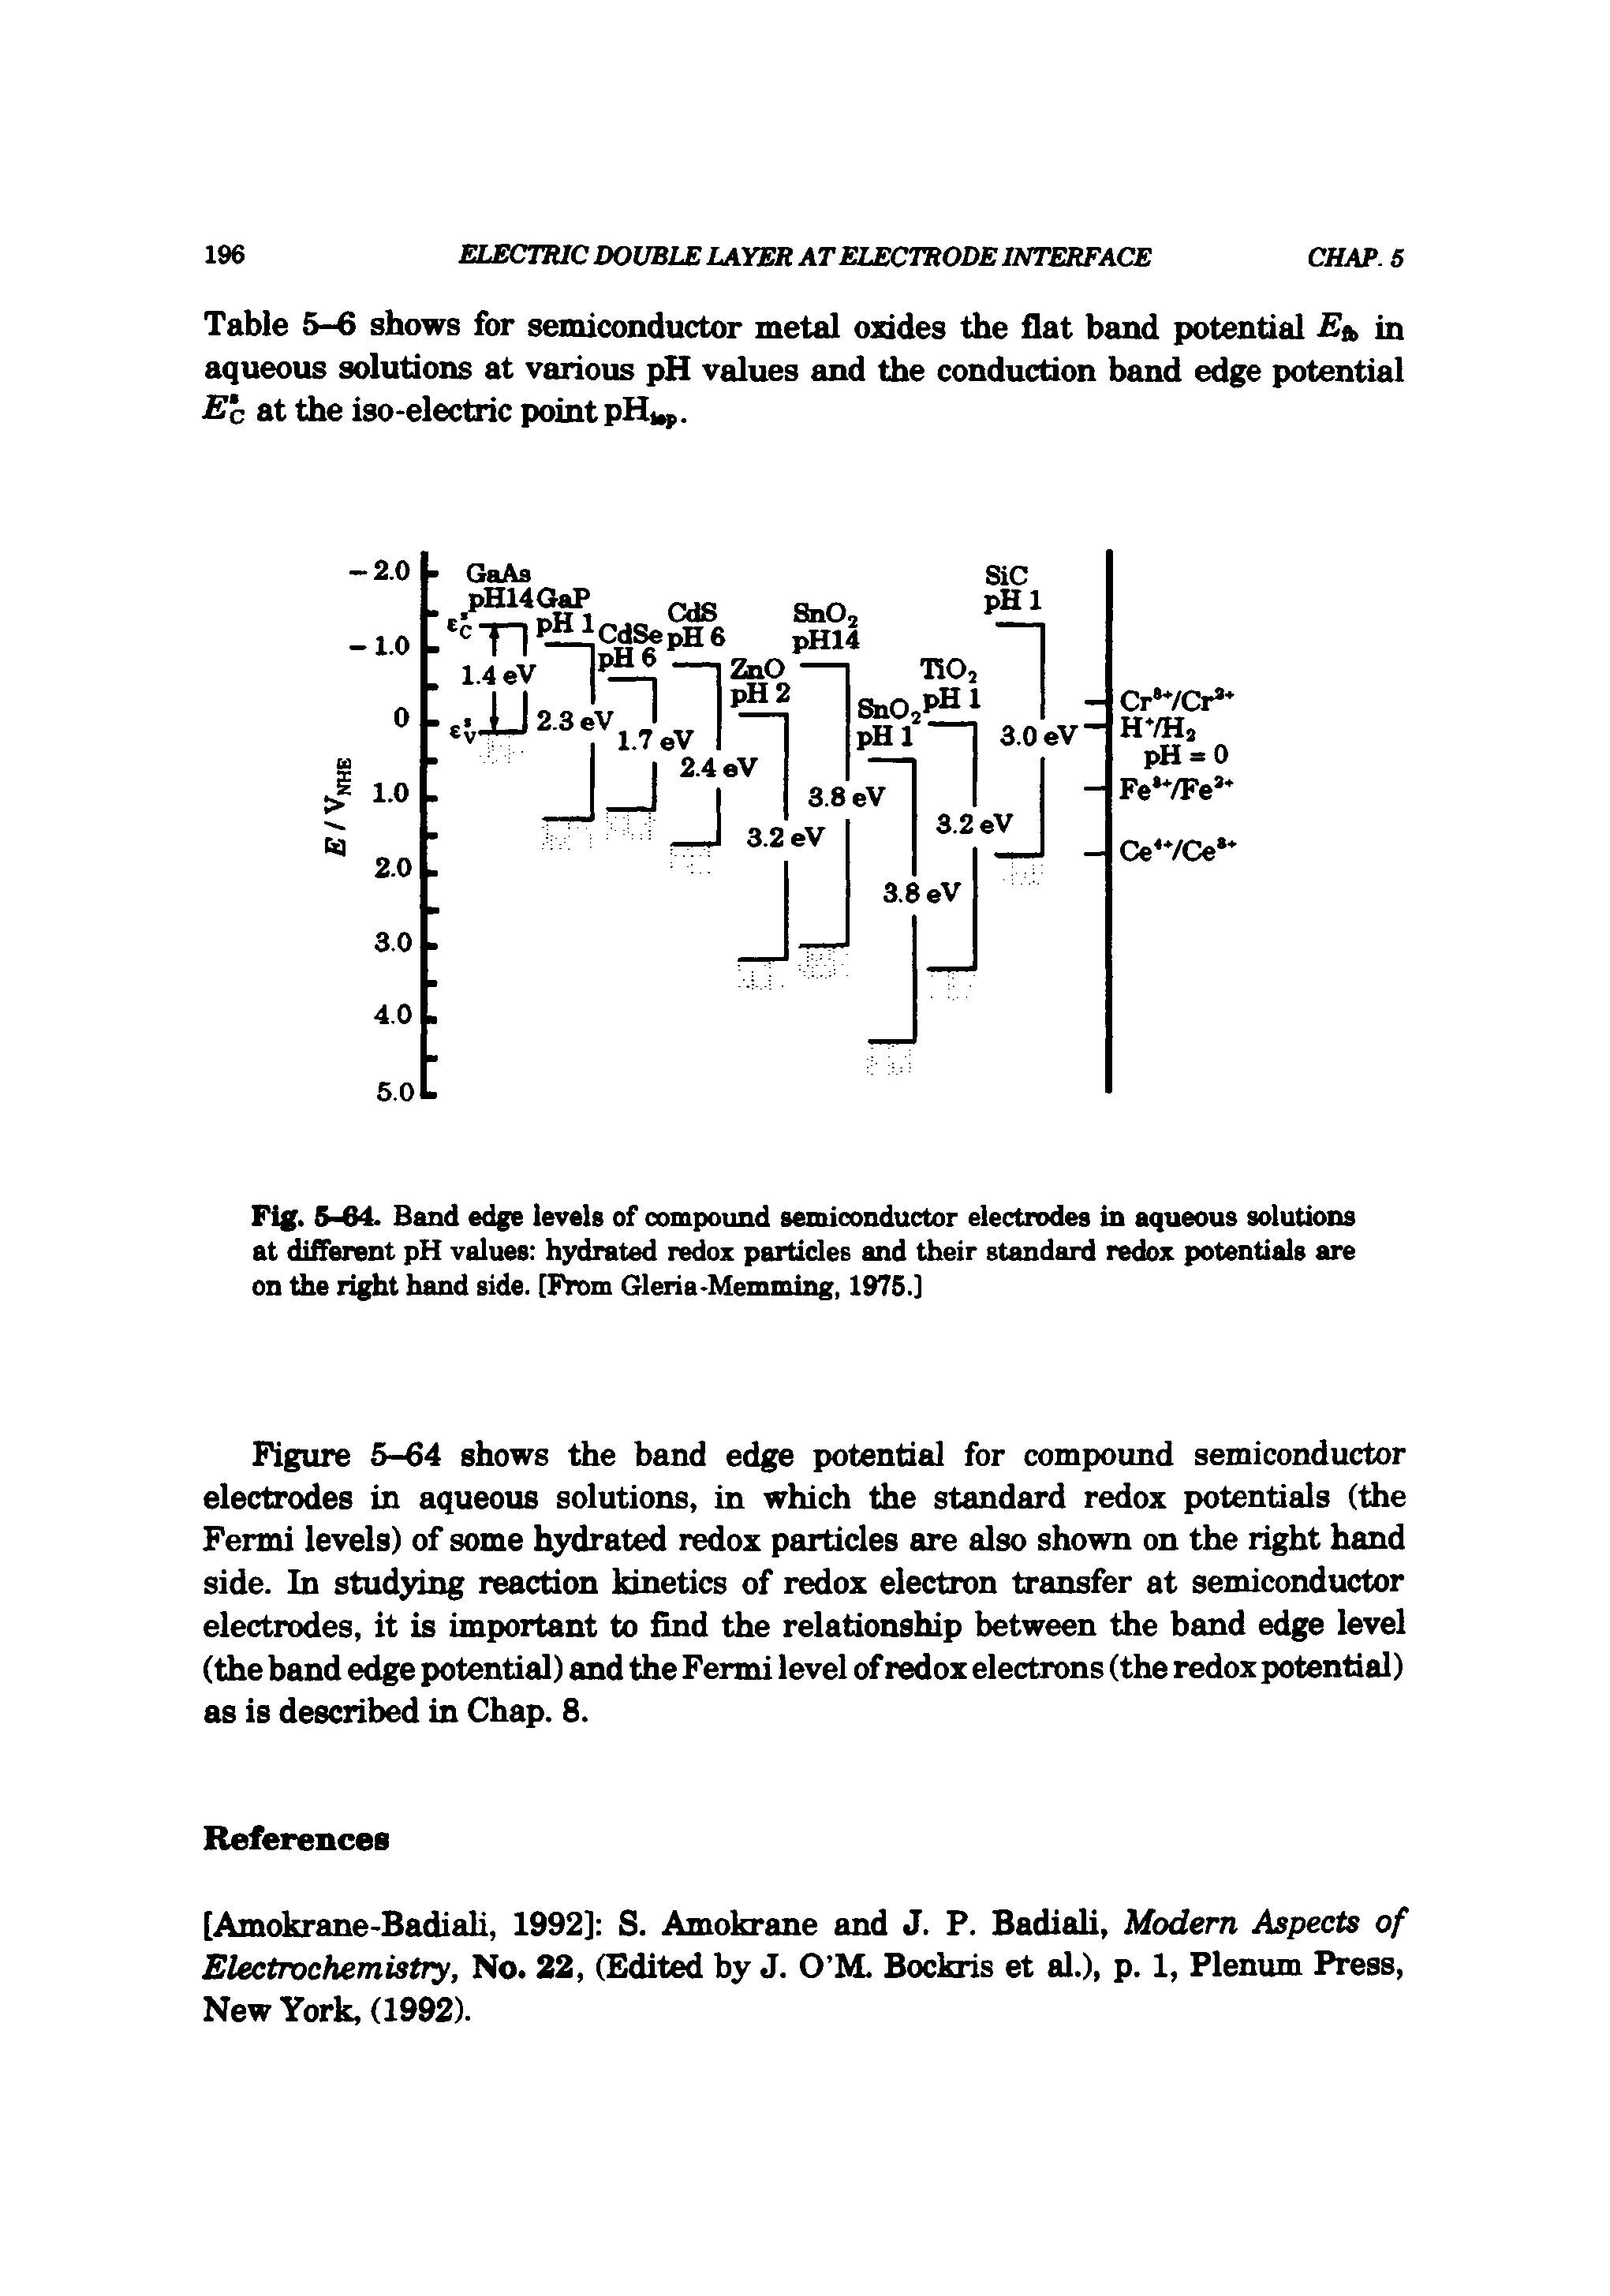 Fig. 5-64. Band edge levels of compound semiconductor electrodes in aqueous solutions at different pH values hydrated redox partides and their standard redox potentials are on the right hand side. [From Gleria-Memming, 1975.]...